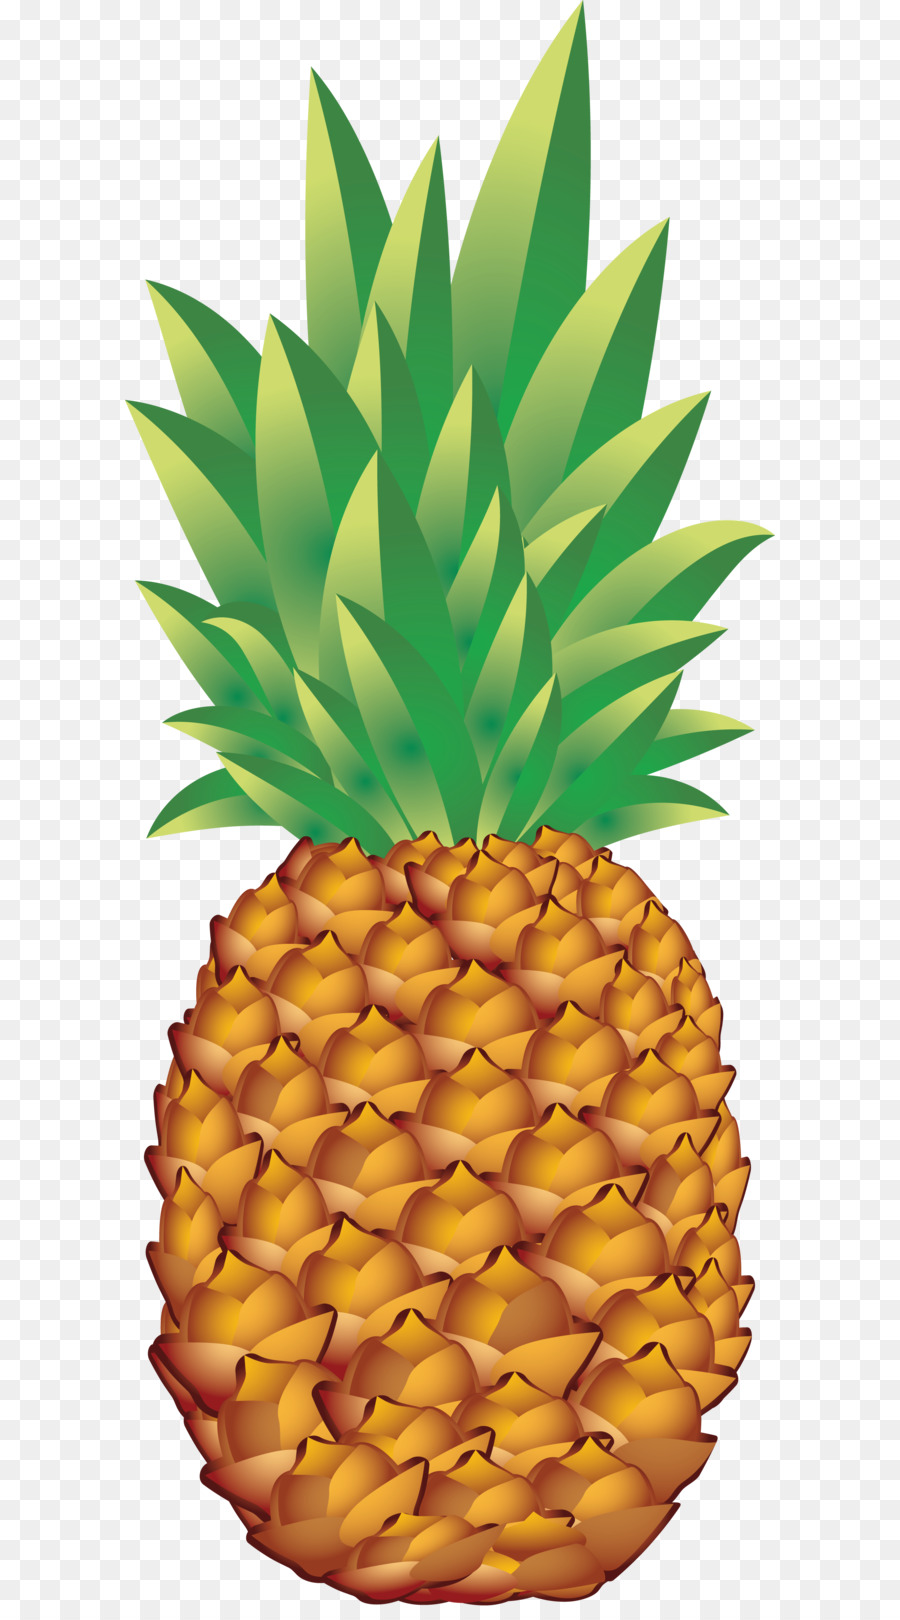 Pineapple Clip art - Pineapple PNG image, free download png download - 1716*4243 - Free Transparent Juice png Download.